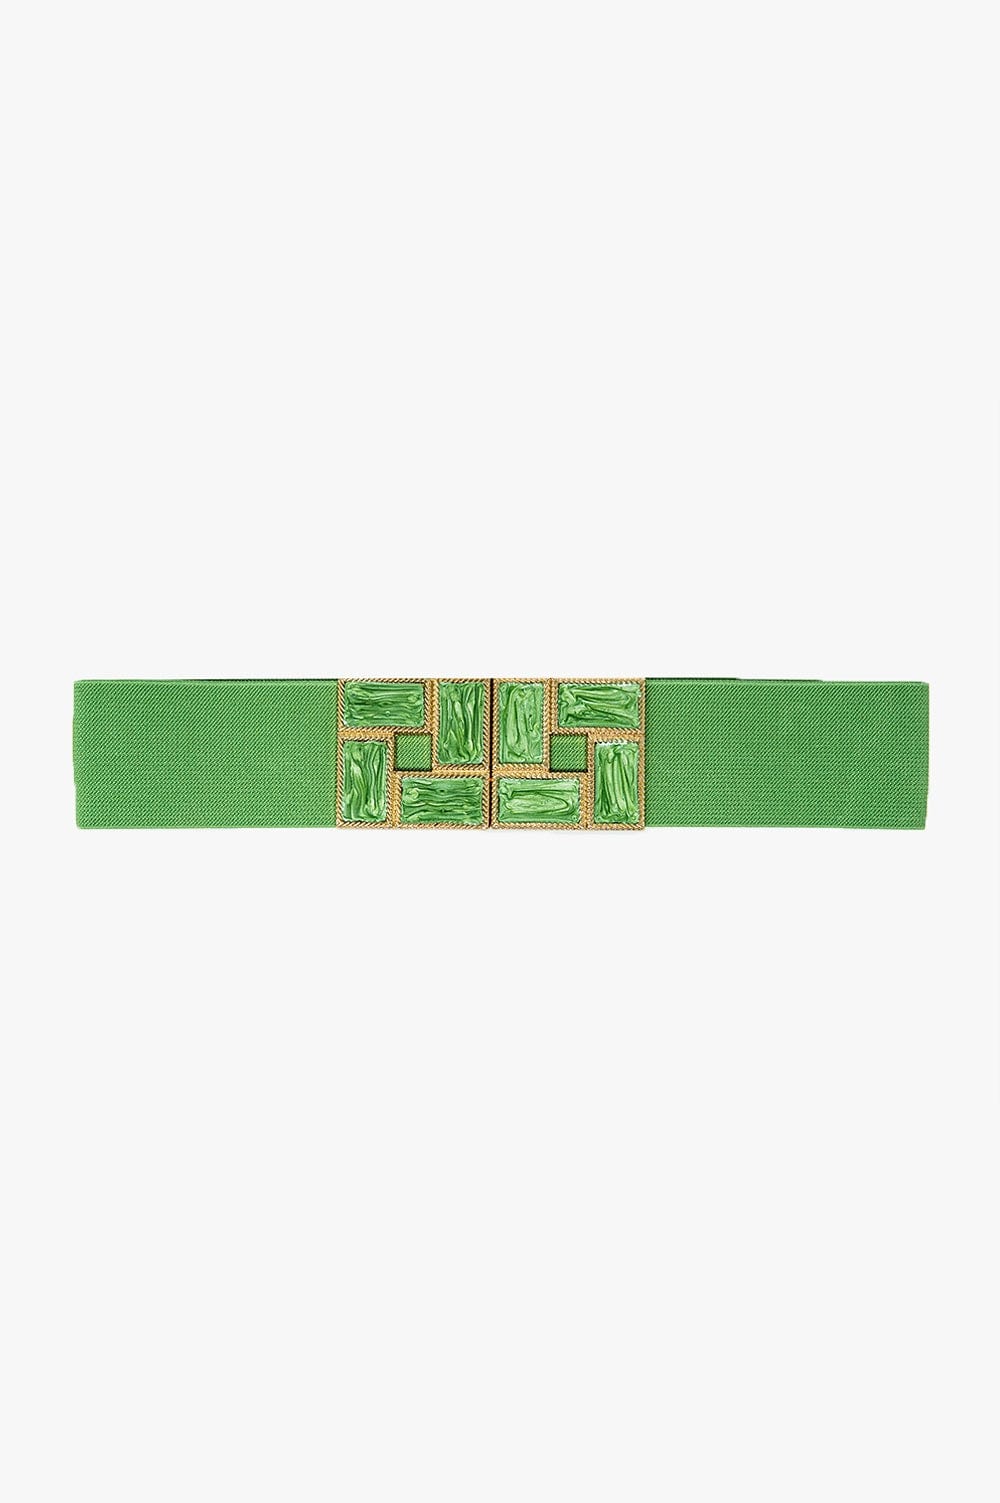 Q2 Women's Belt One Size / Green Green Elastic Belt With Squared Marbled Buckles And Gold Details